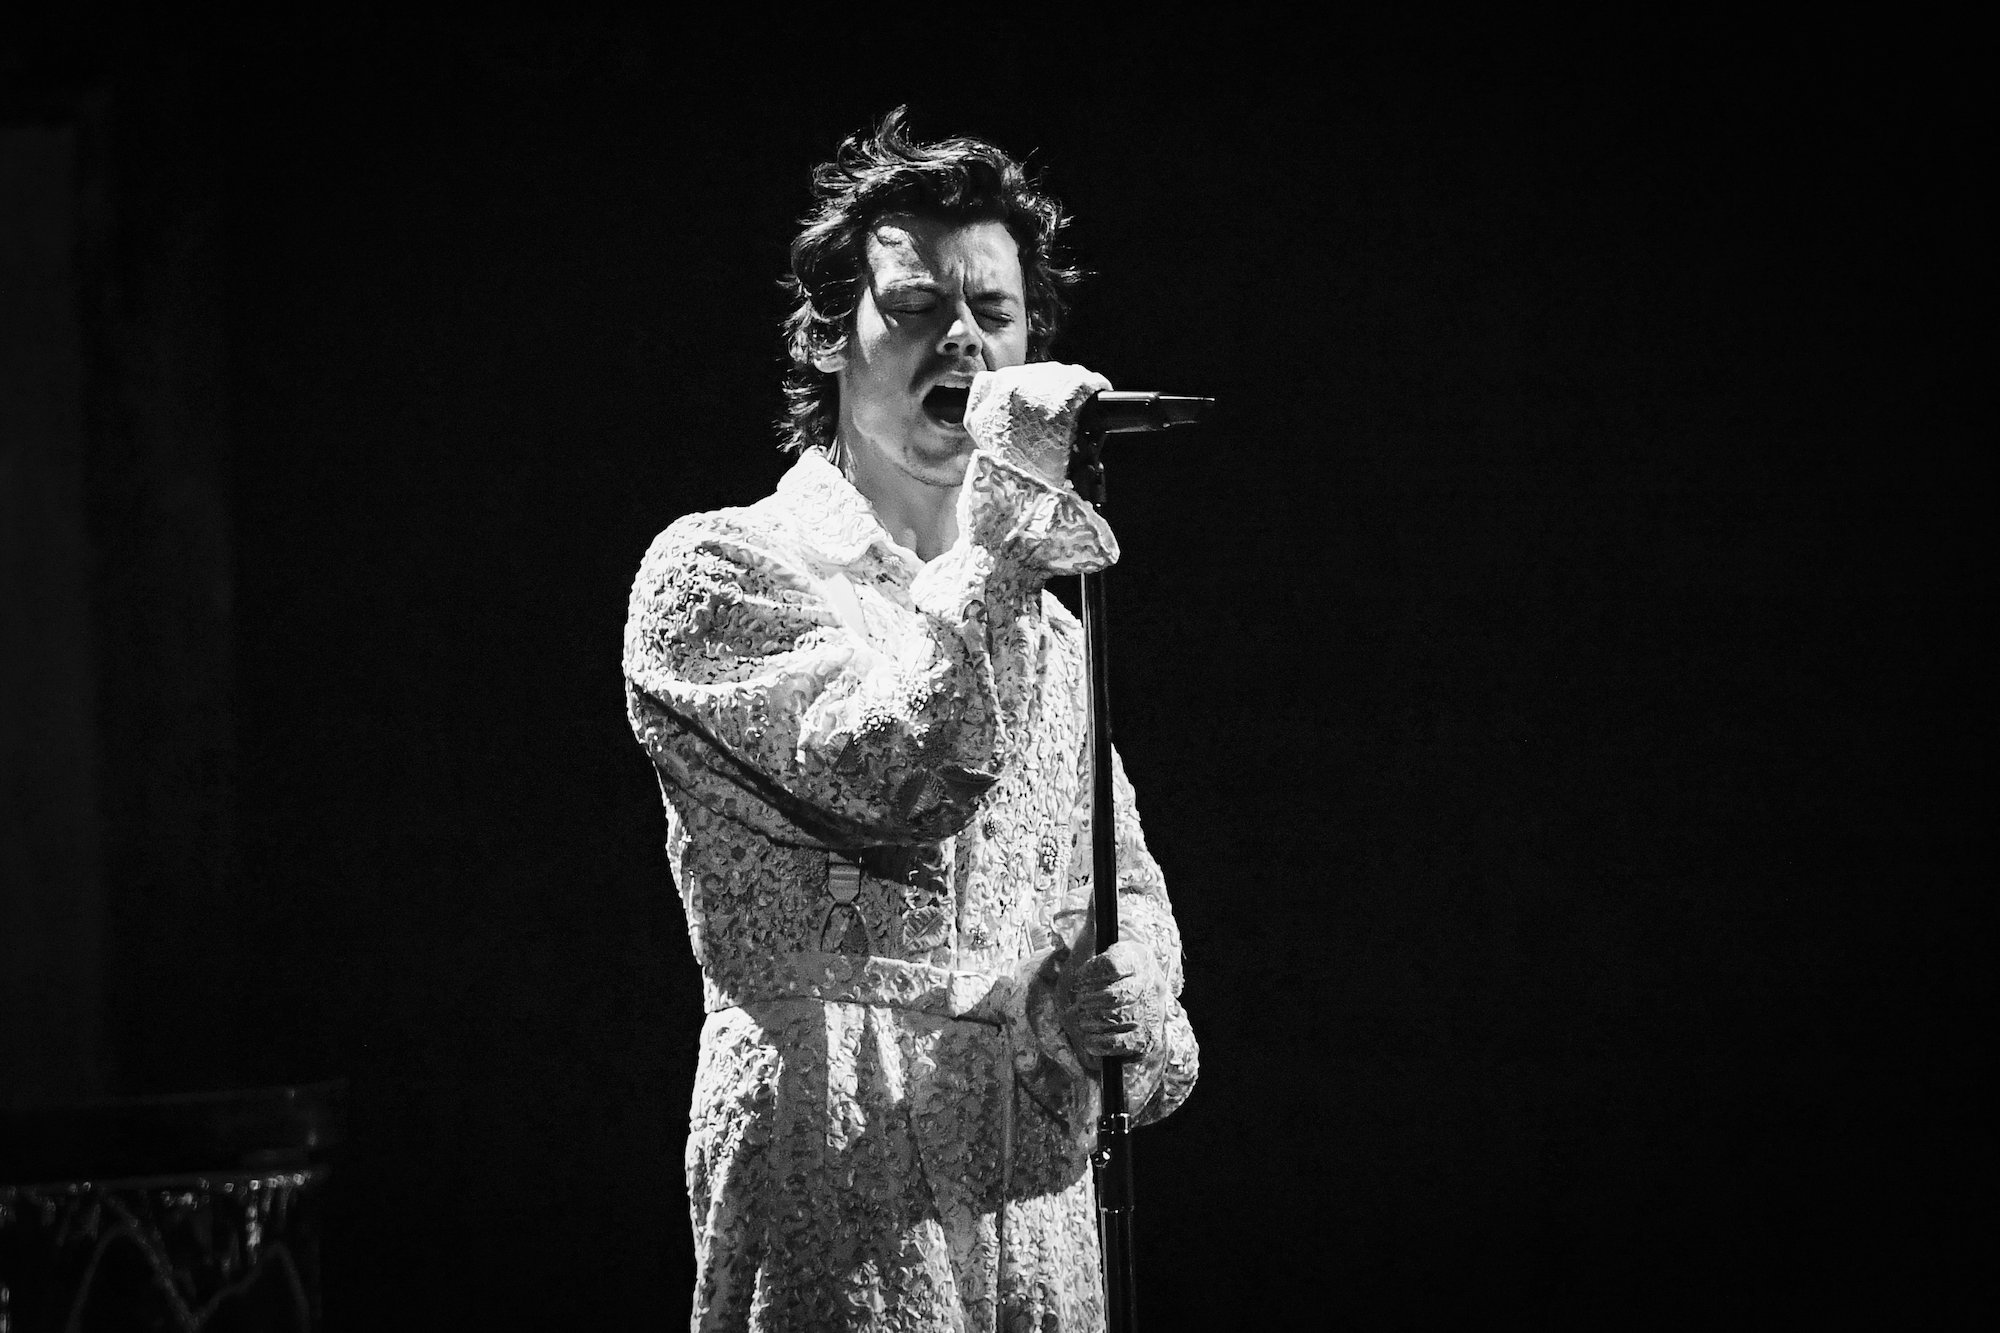 Harry Styles singing at The BRIT Awards 2020 at The O2 Arena on February 18, 2020